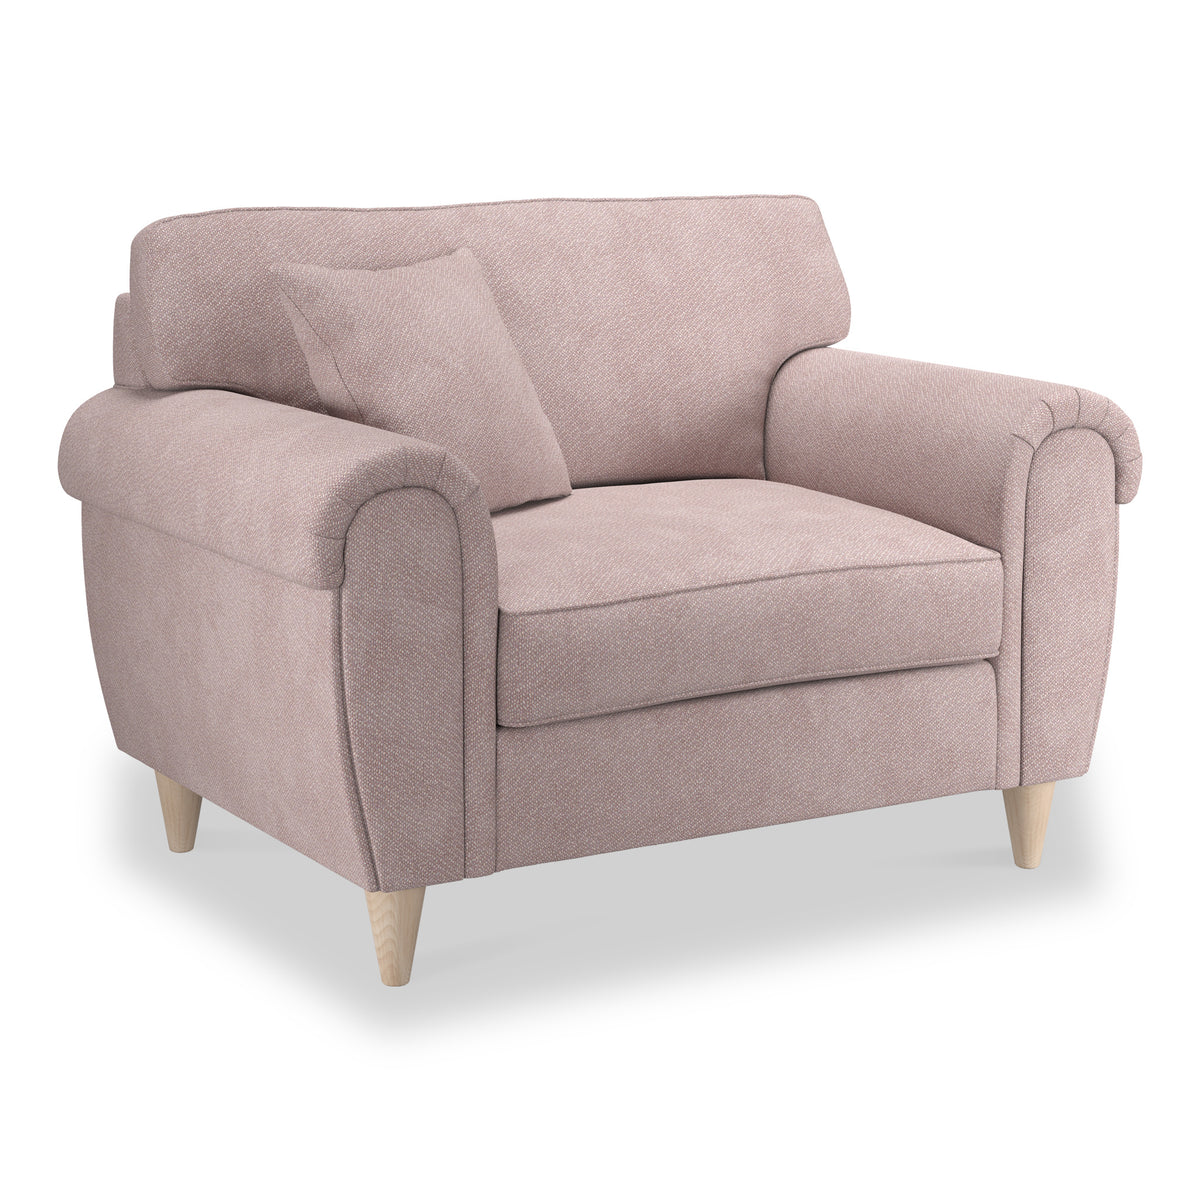 Harry Mauve Snuggle Armchair from Roseland Furniture